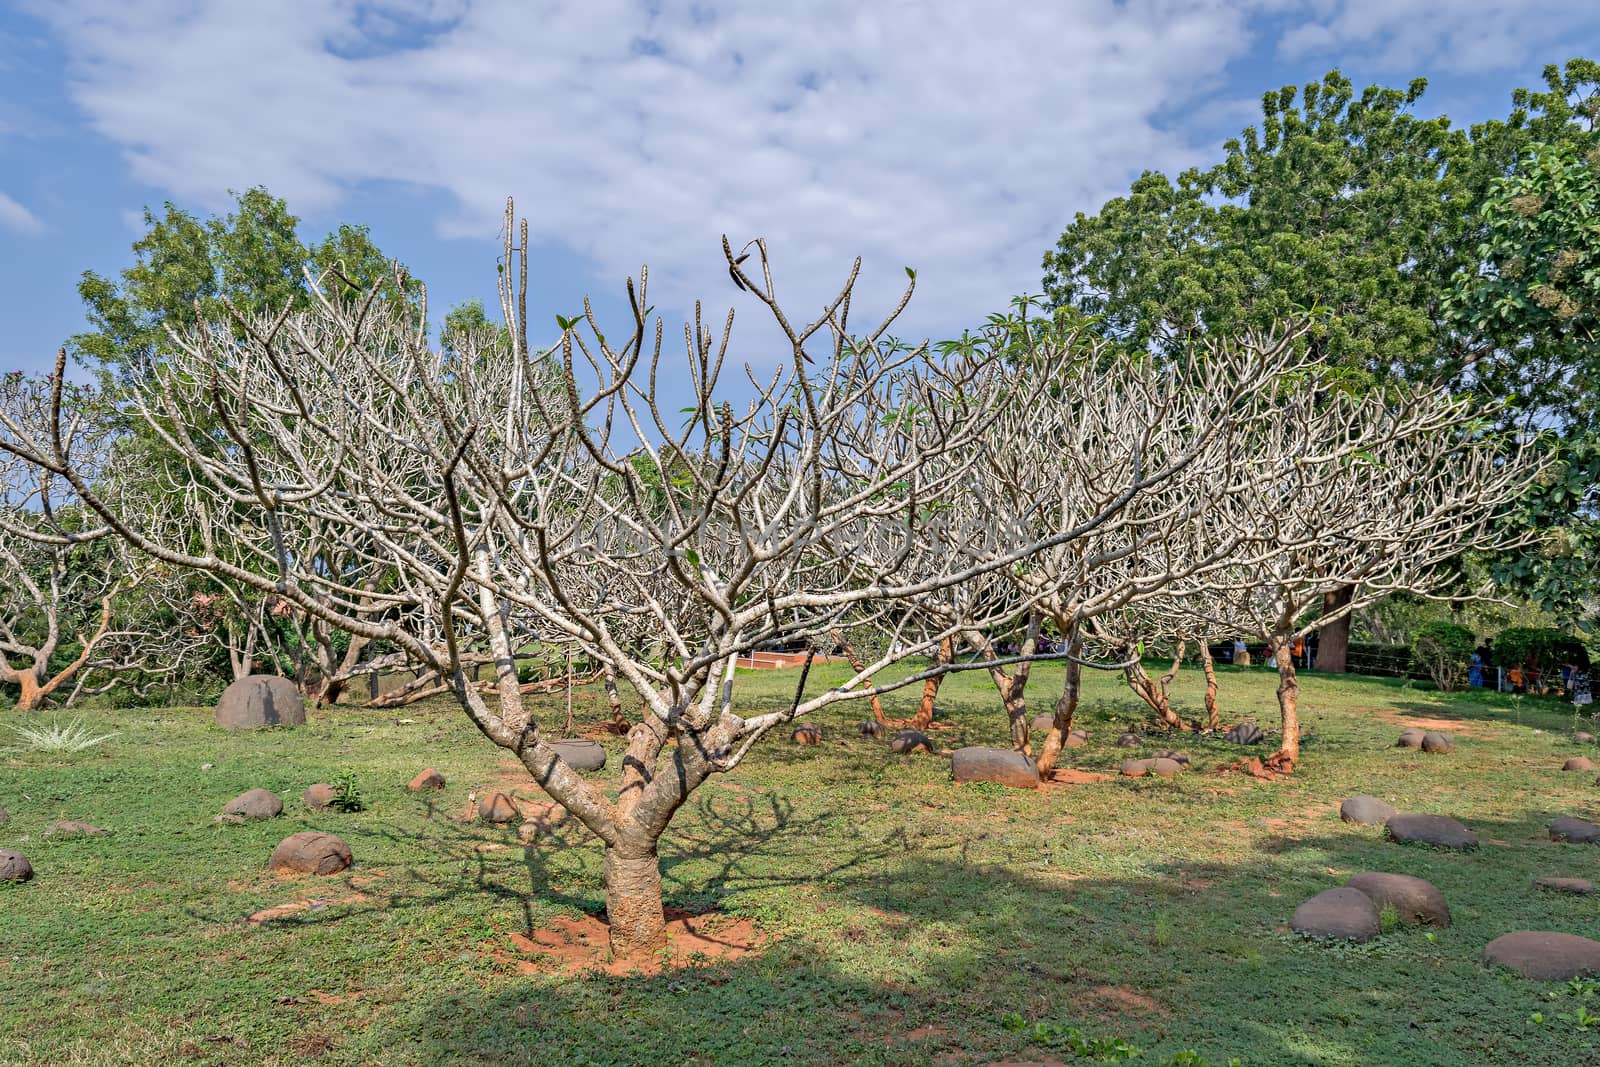 Dry tree in Garden in the spiritual town of Auroville, Pondicherry, India.